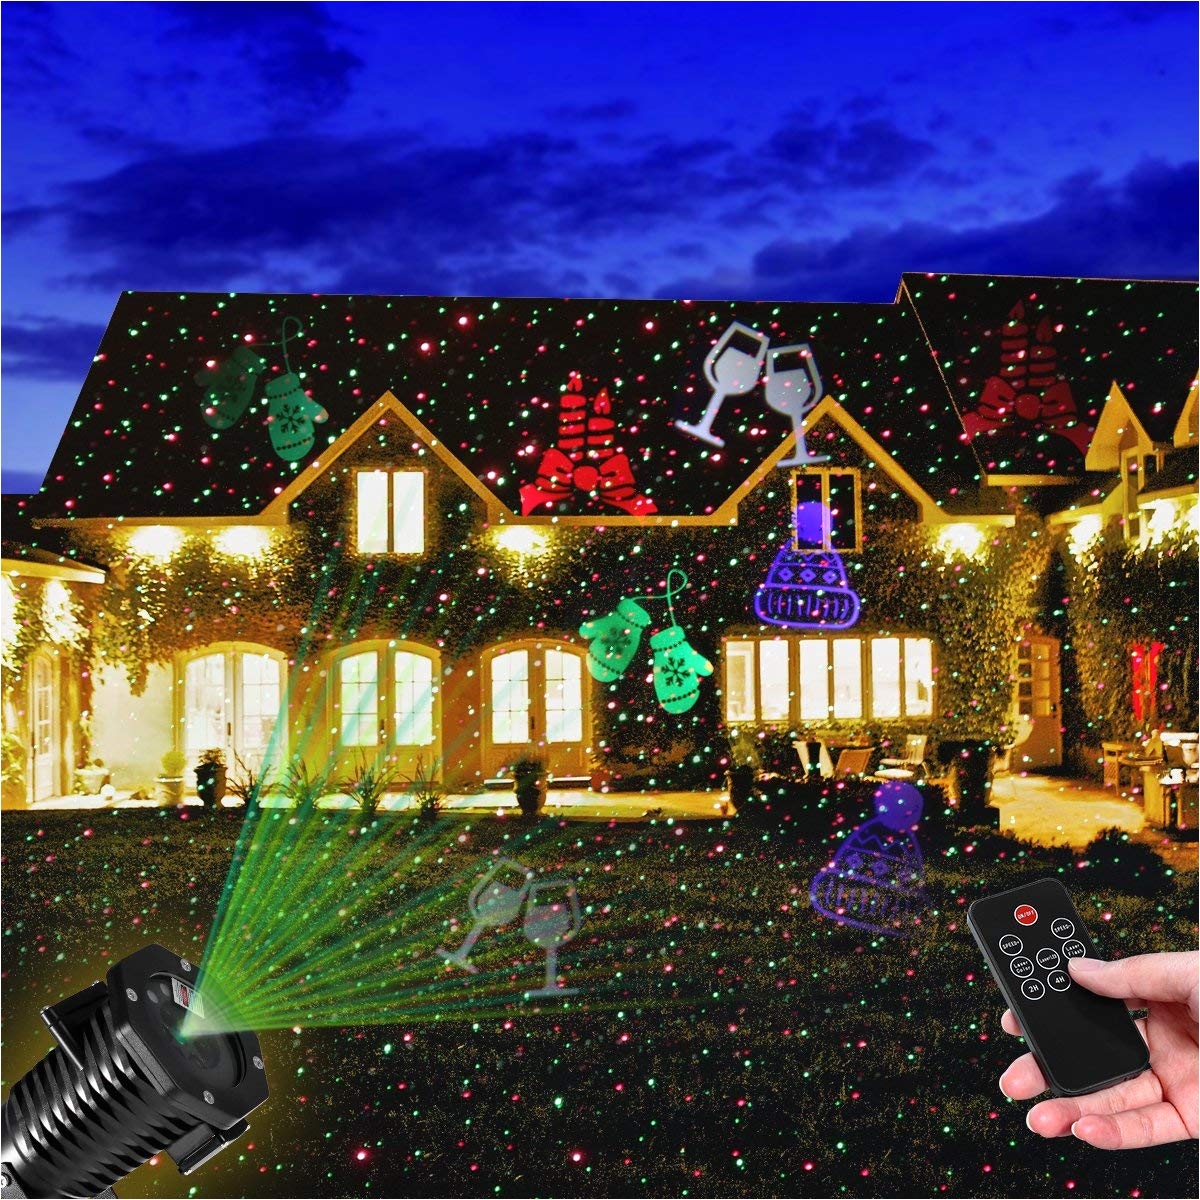 amazon com christmas light projector yunlights waterproof outdoor laser lights holiday projector with rf wireless remote red and green star projector